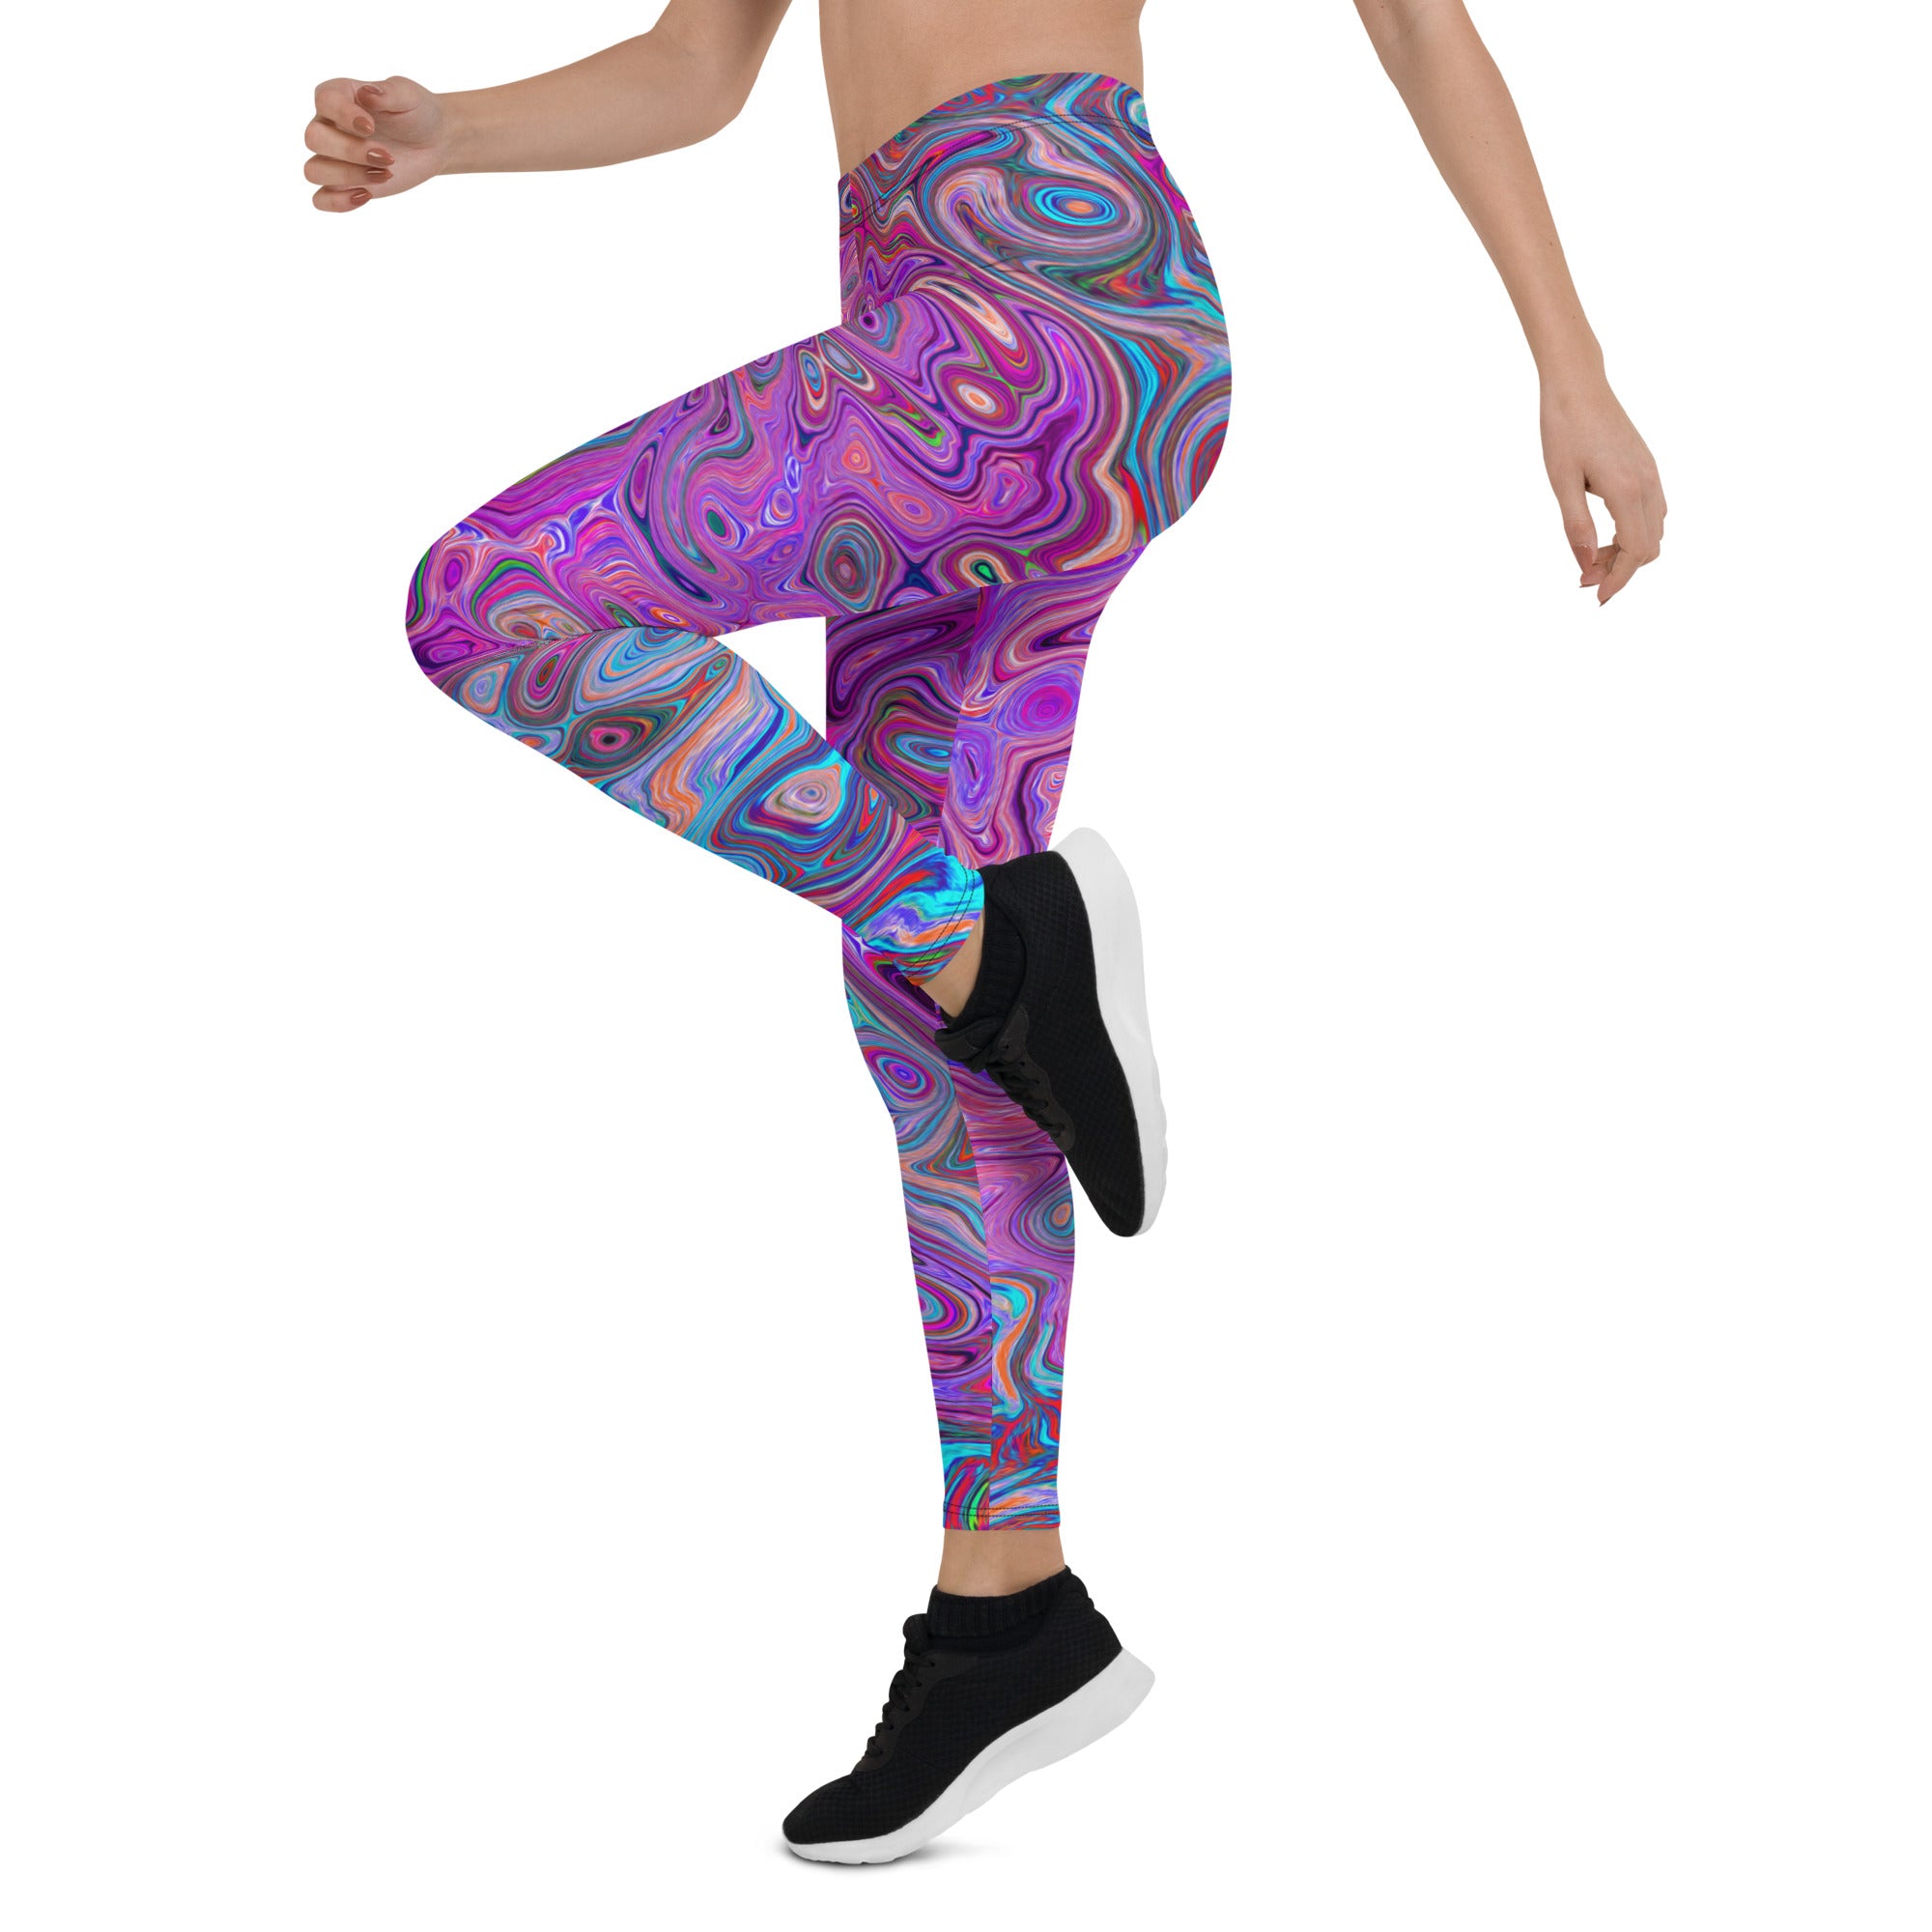 Leggings for Women - Purple, Blue and Red Abstract Retro Swirl